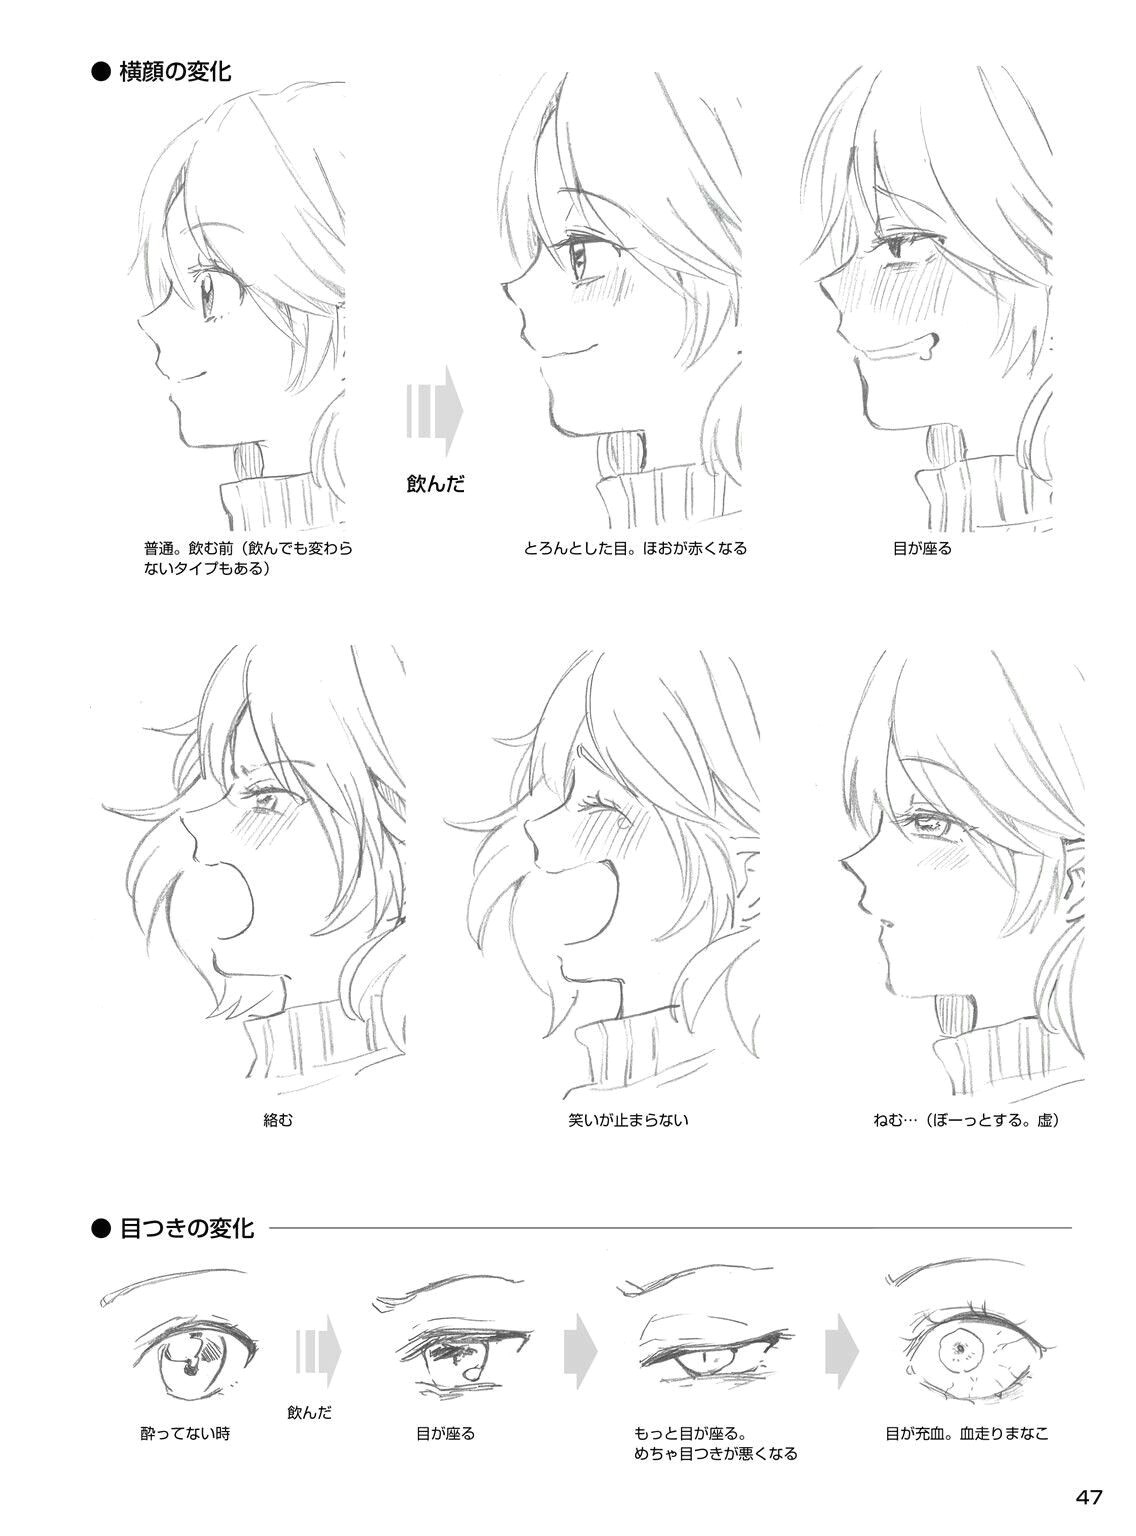 Drawing Anime Expressions Pin by Wolf Drawing64 On Anime Manga Art Drawing Tips Pinterest